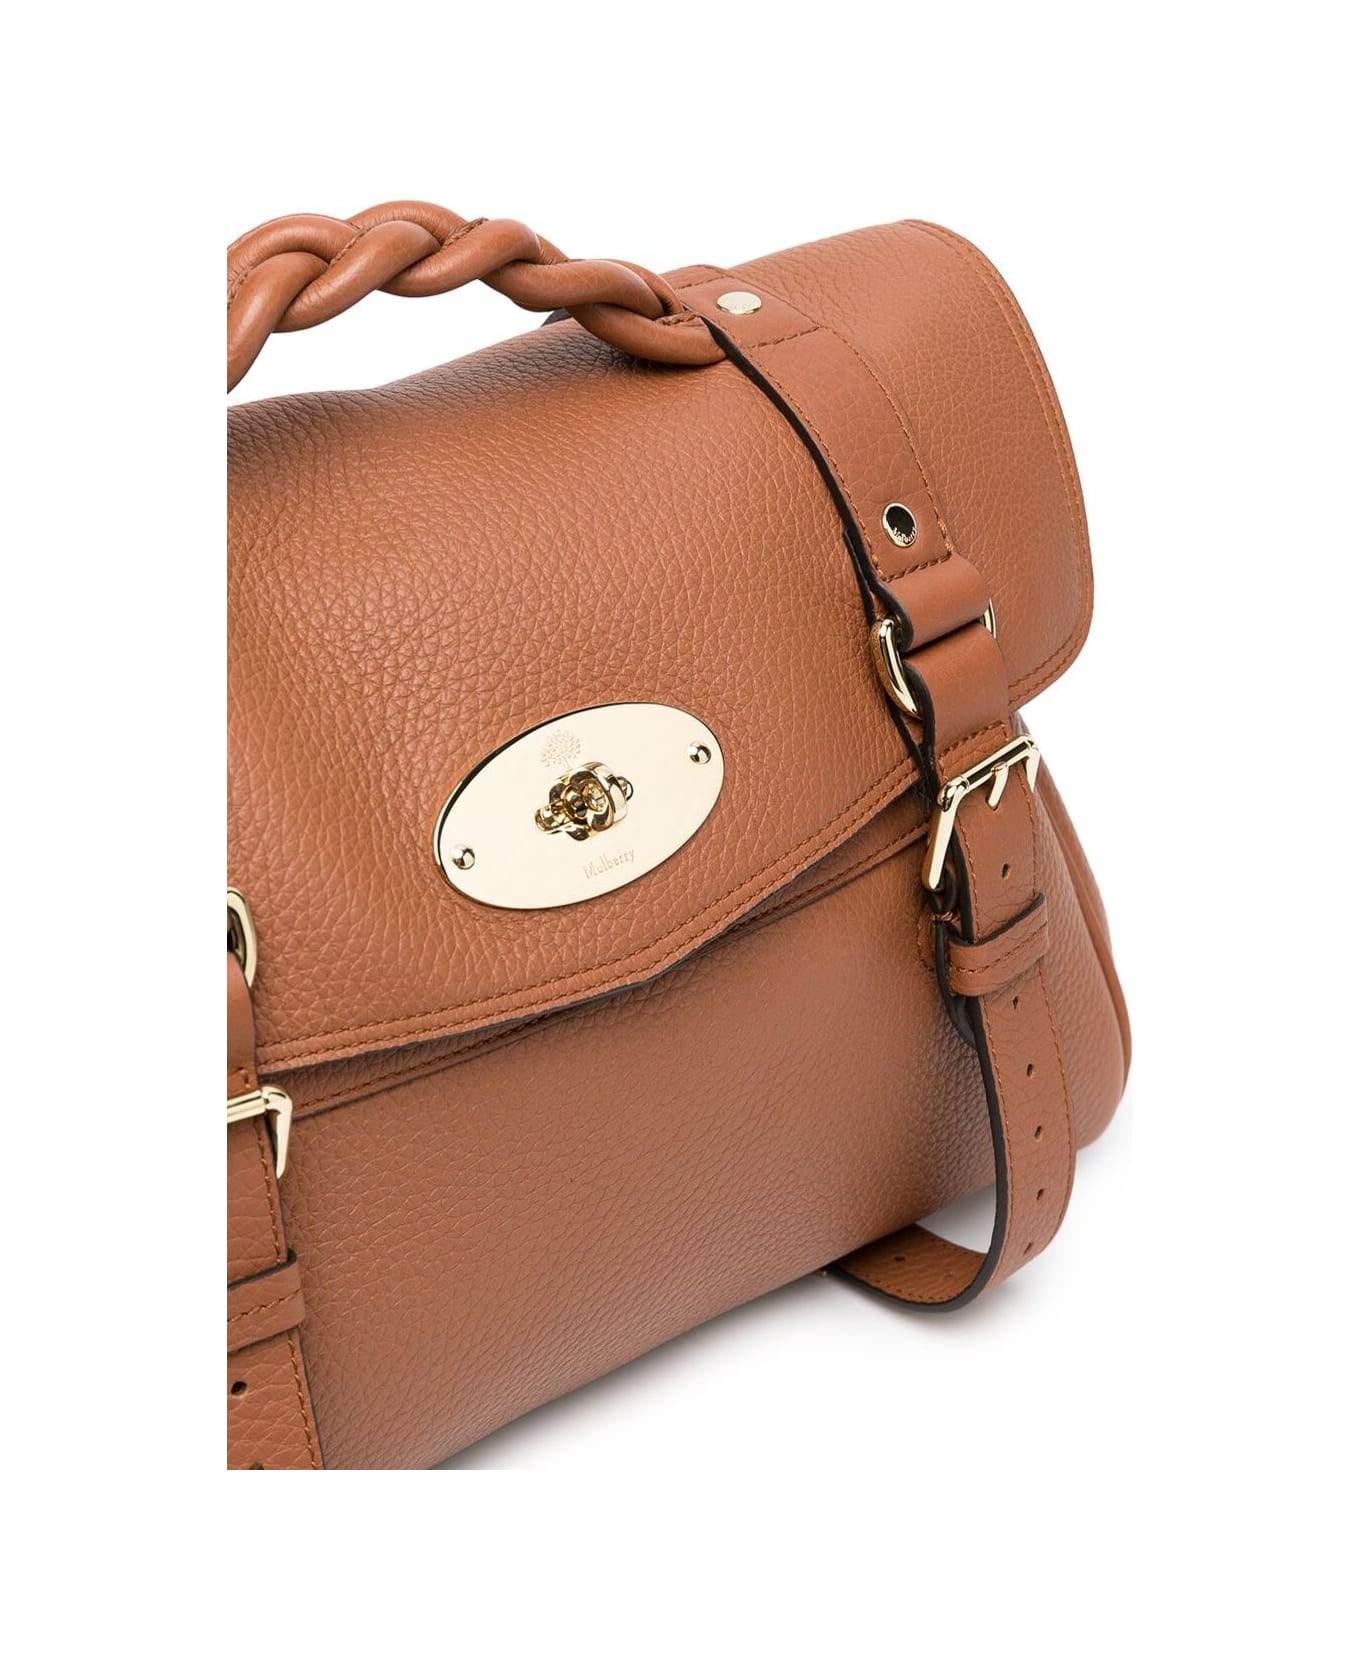 Mulberry Alexa Heavy Brown Leather Crossbody Bag Mulberry Woman - Beige